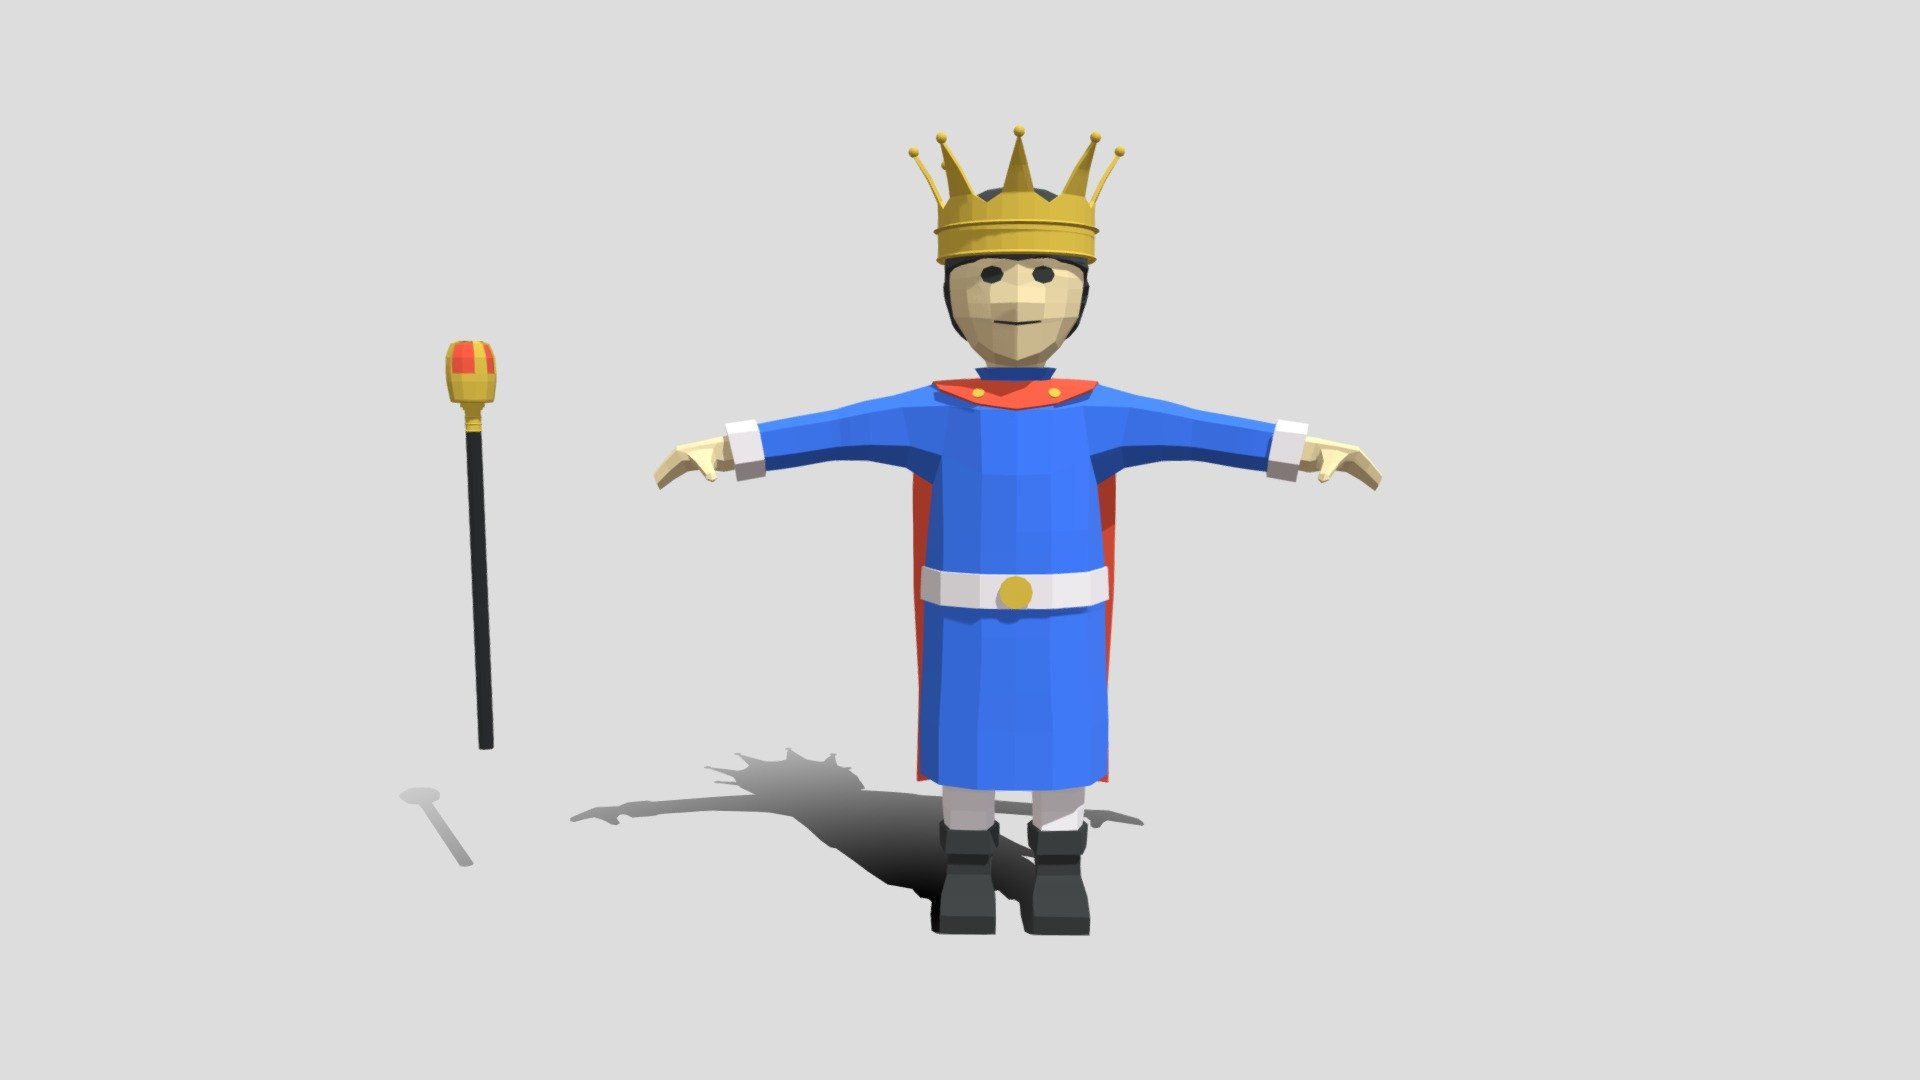 Τhis is a low poly 3D model of a King. The low poly King was modeled and prepared for low-poly style renderings, background, general CG visualization presented as 3 meshes with quads only. The crown , and the sceptre are seperate objects.

Verts : 4.077 Faces: 3.998.

The model have simple materials with diffuse colors.

No ring, maps and no UVW mapping is available.

The original file was created in blender. You will receive a 3DS, OBJ, FBX, blend, DAE, Stl, glTF.

All preview images were rendered with Blender Cycles. Product is ready to render out-of-the-box. Please note that the lights, cameras, and background is only included in the .blend file. The model is clean and alone in the other provided files, centered at origin and has real-world scale 3d model